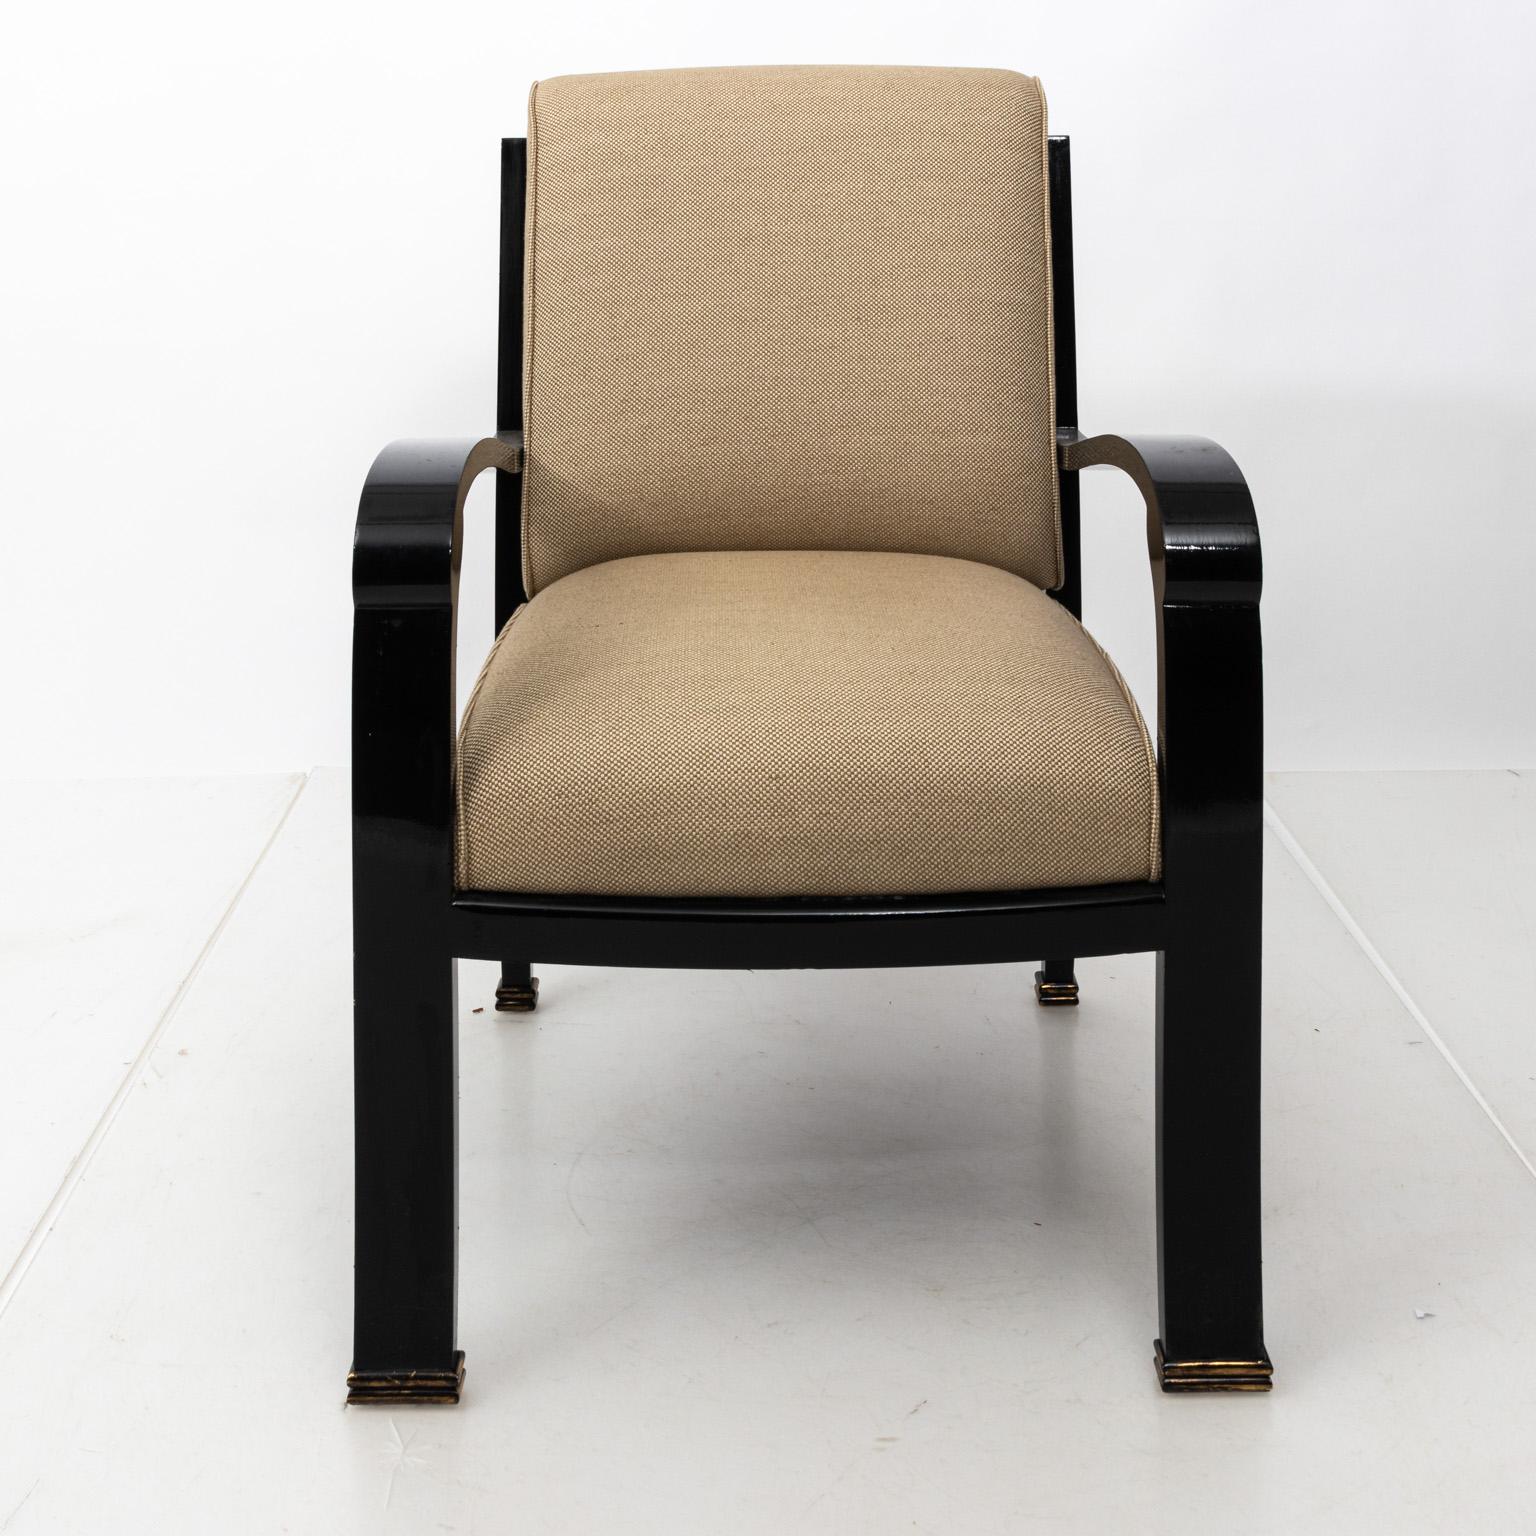 Black lacquered desk armchair with upholstered seat. Please note of wear consistent with age including minor chips, scratches, and finish loss to wood.